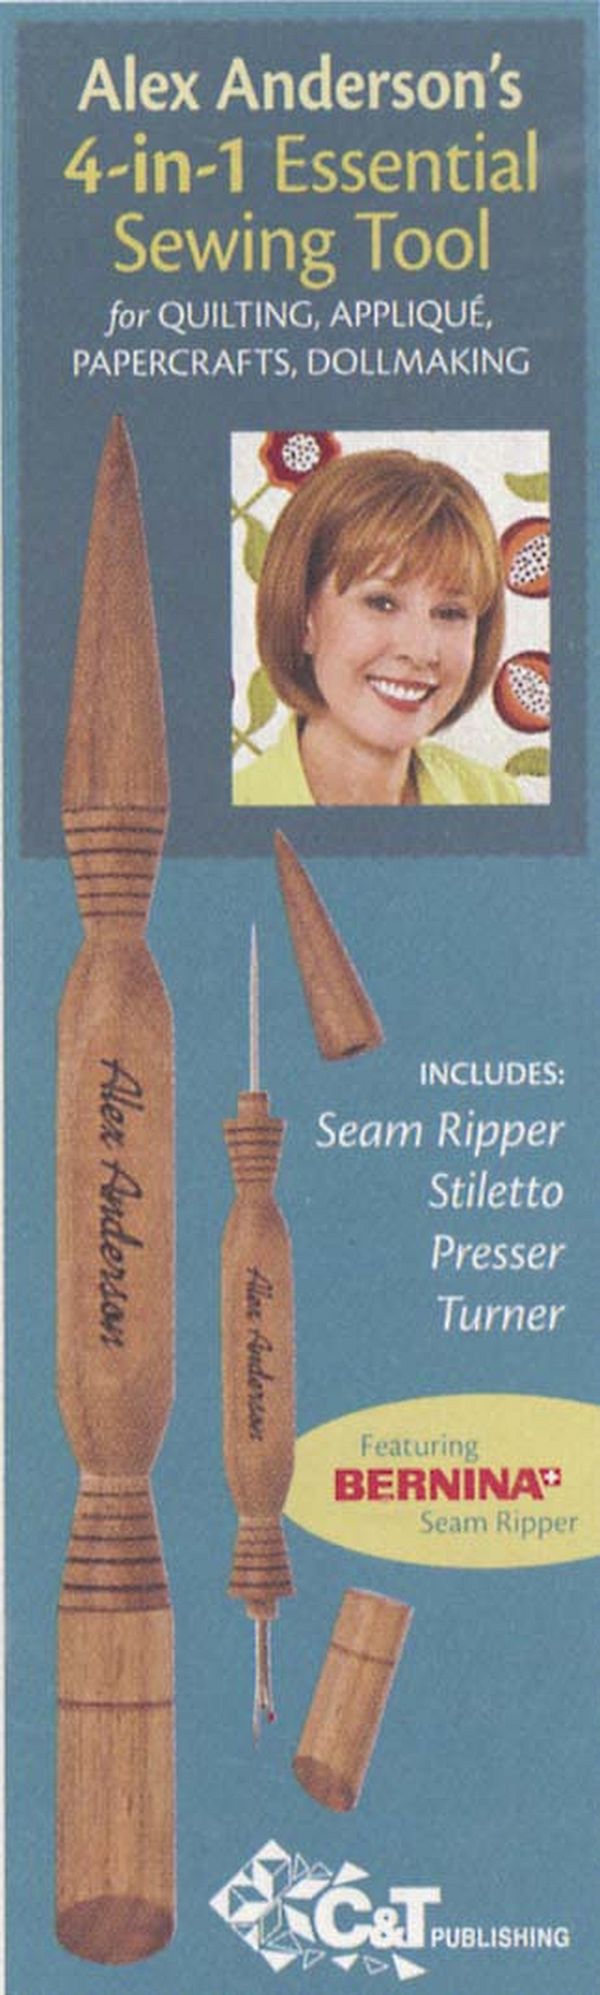 Alex Anderson's 4-In-1 Essential Sewing Tool For Quilting, Applique, Papercrafts, And Dollmaking